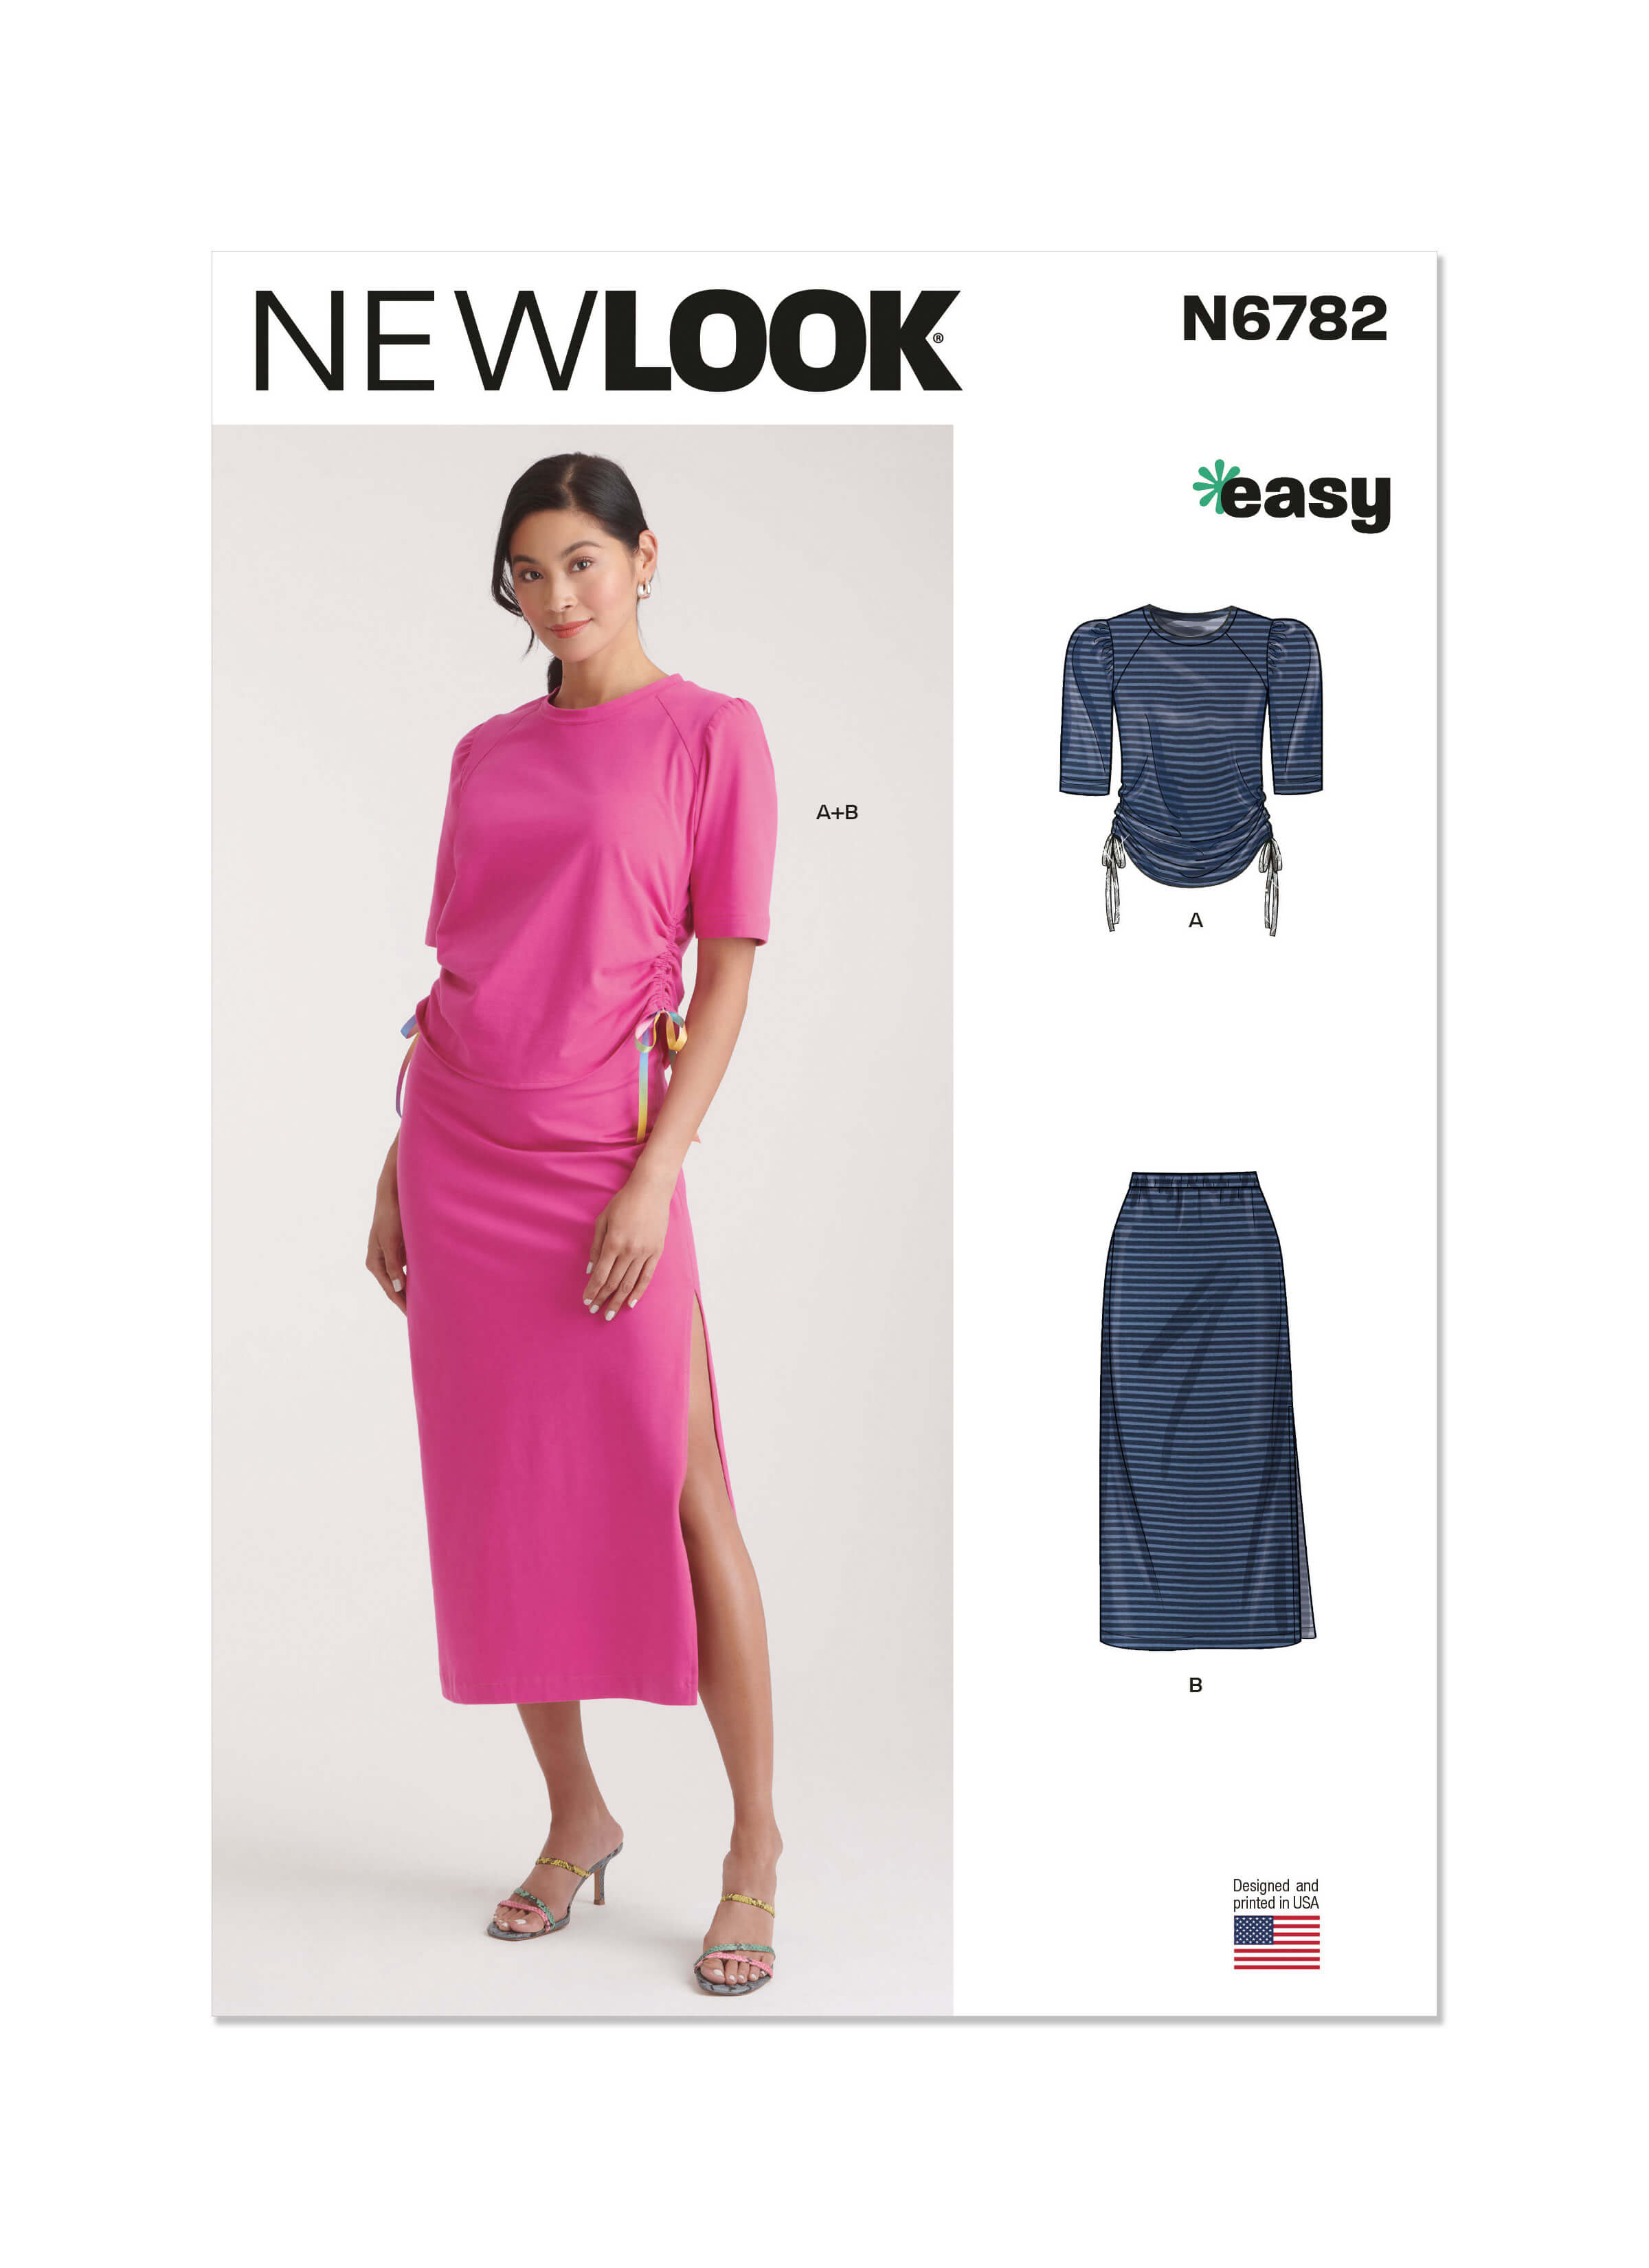 New Look Sewing Pattern N6782 Misses' Knit Top and Skirt